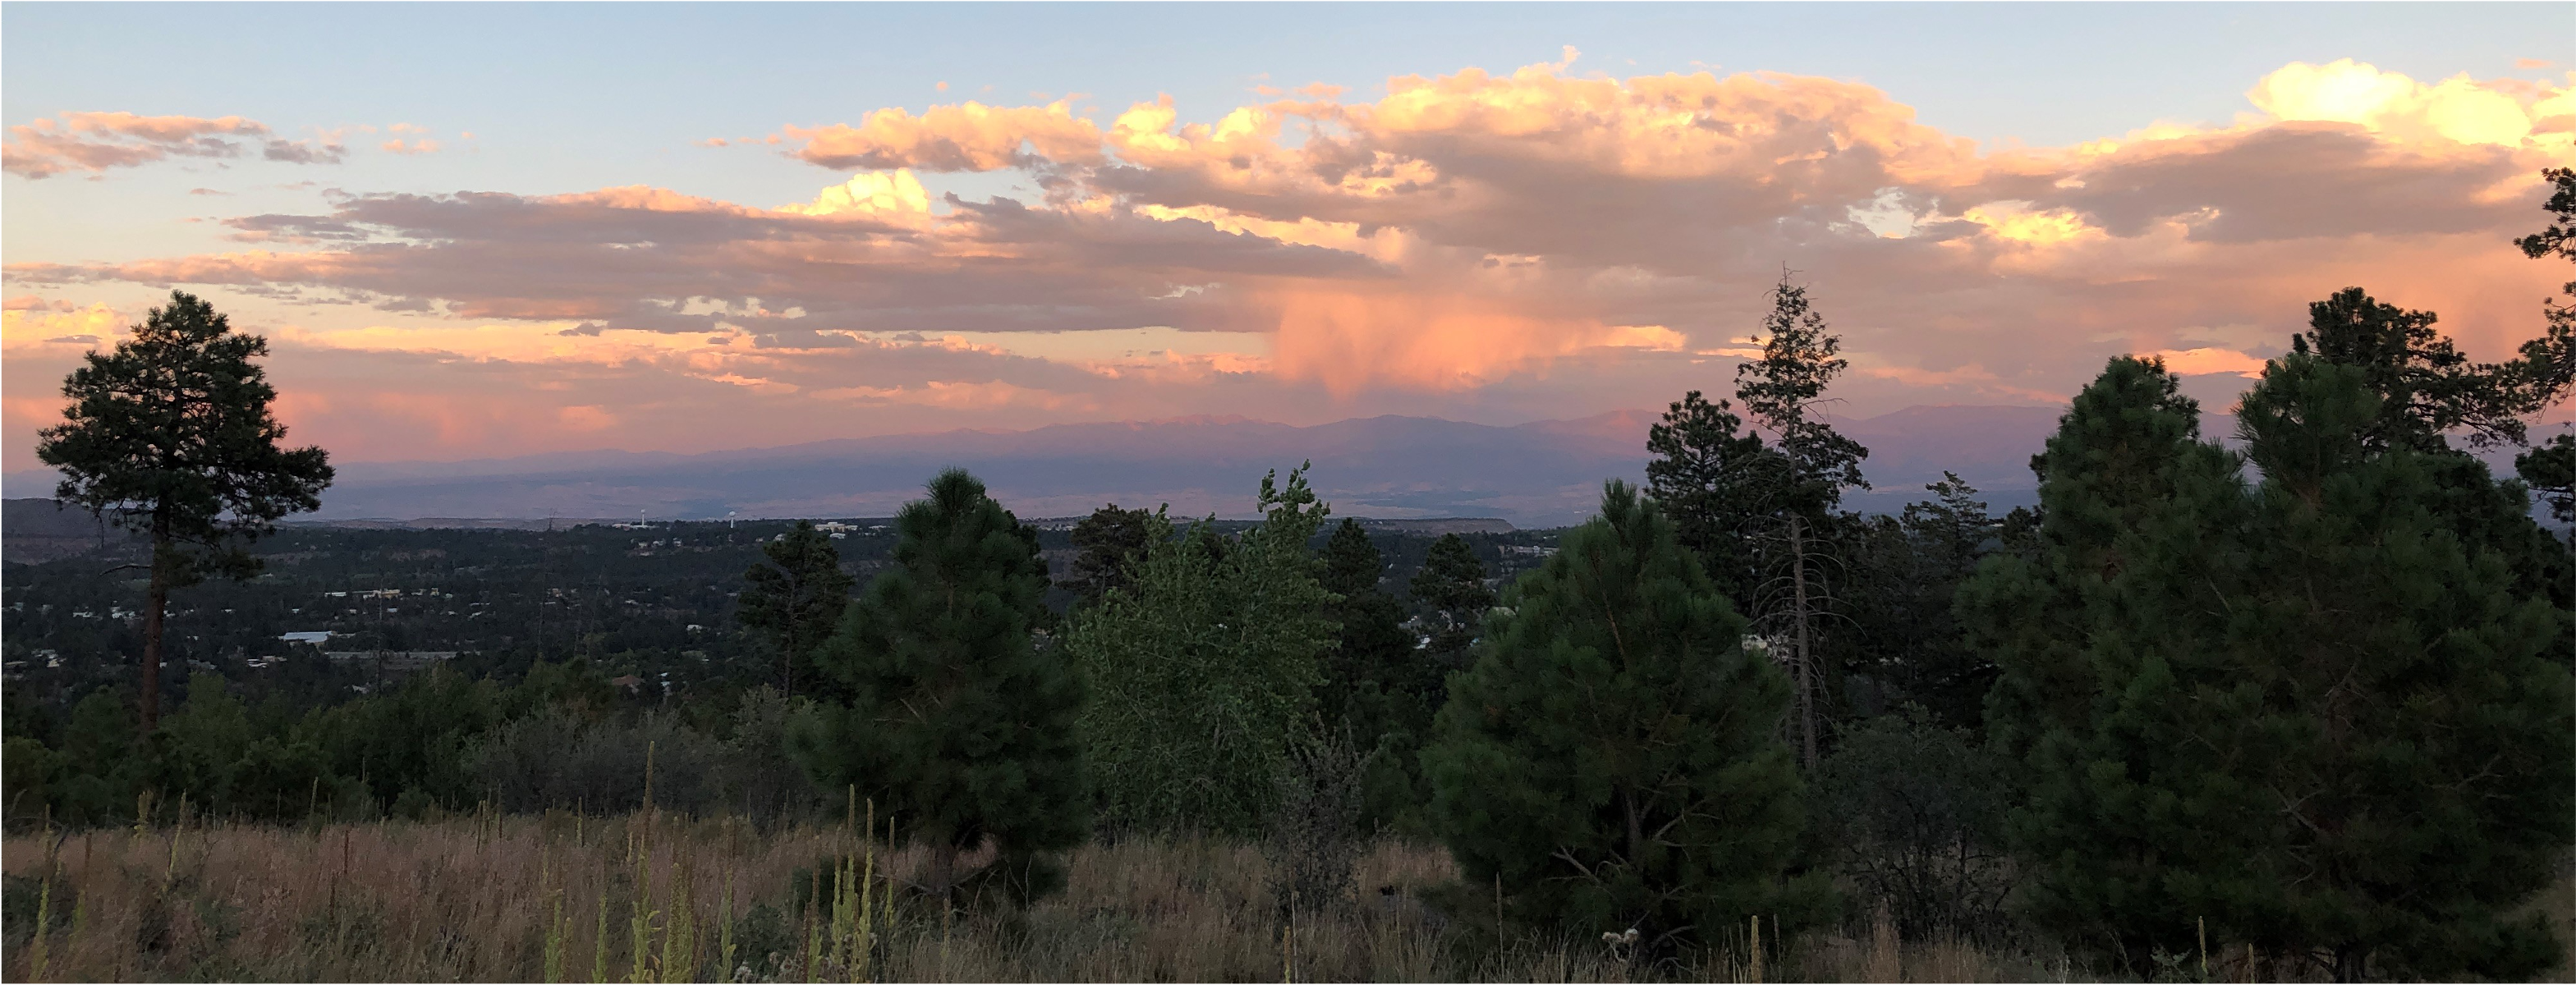 photo of sunset over the NM mountains with trees in the foreground